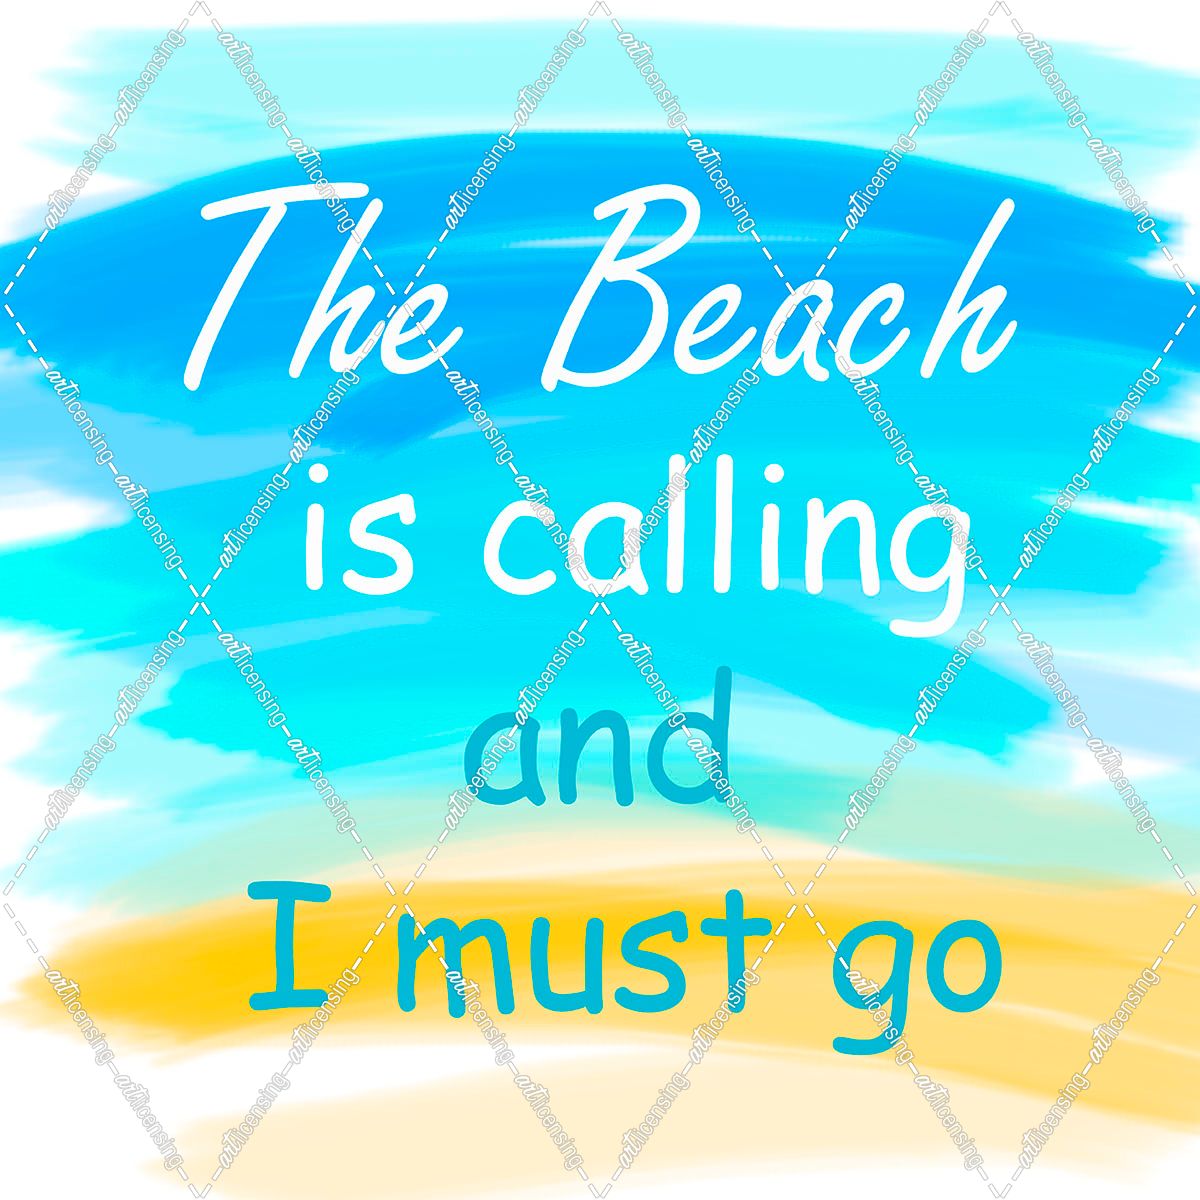 The Beach is Calling and I Must Go